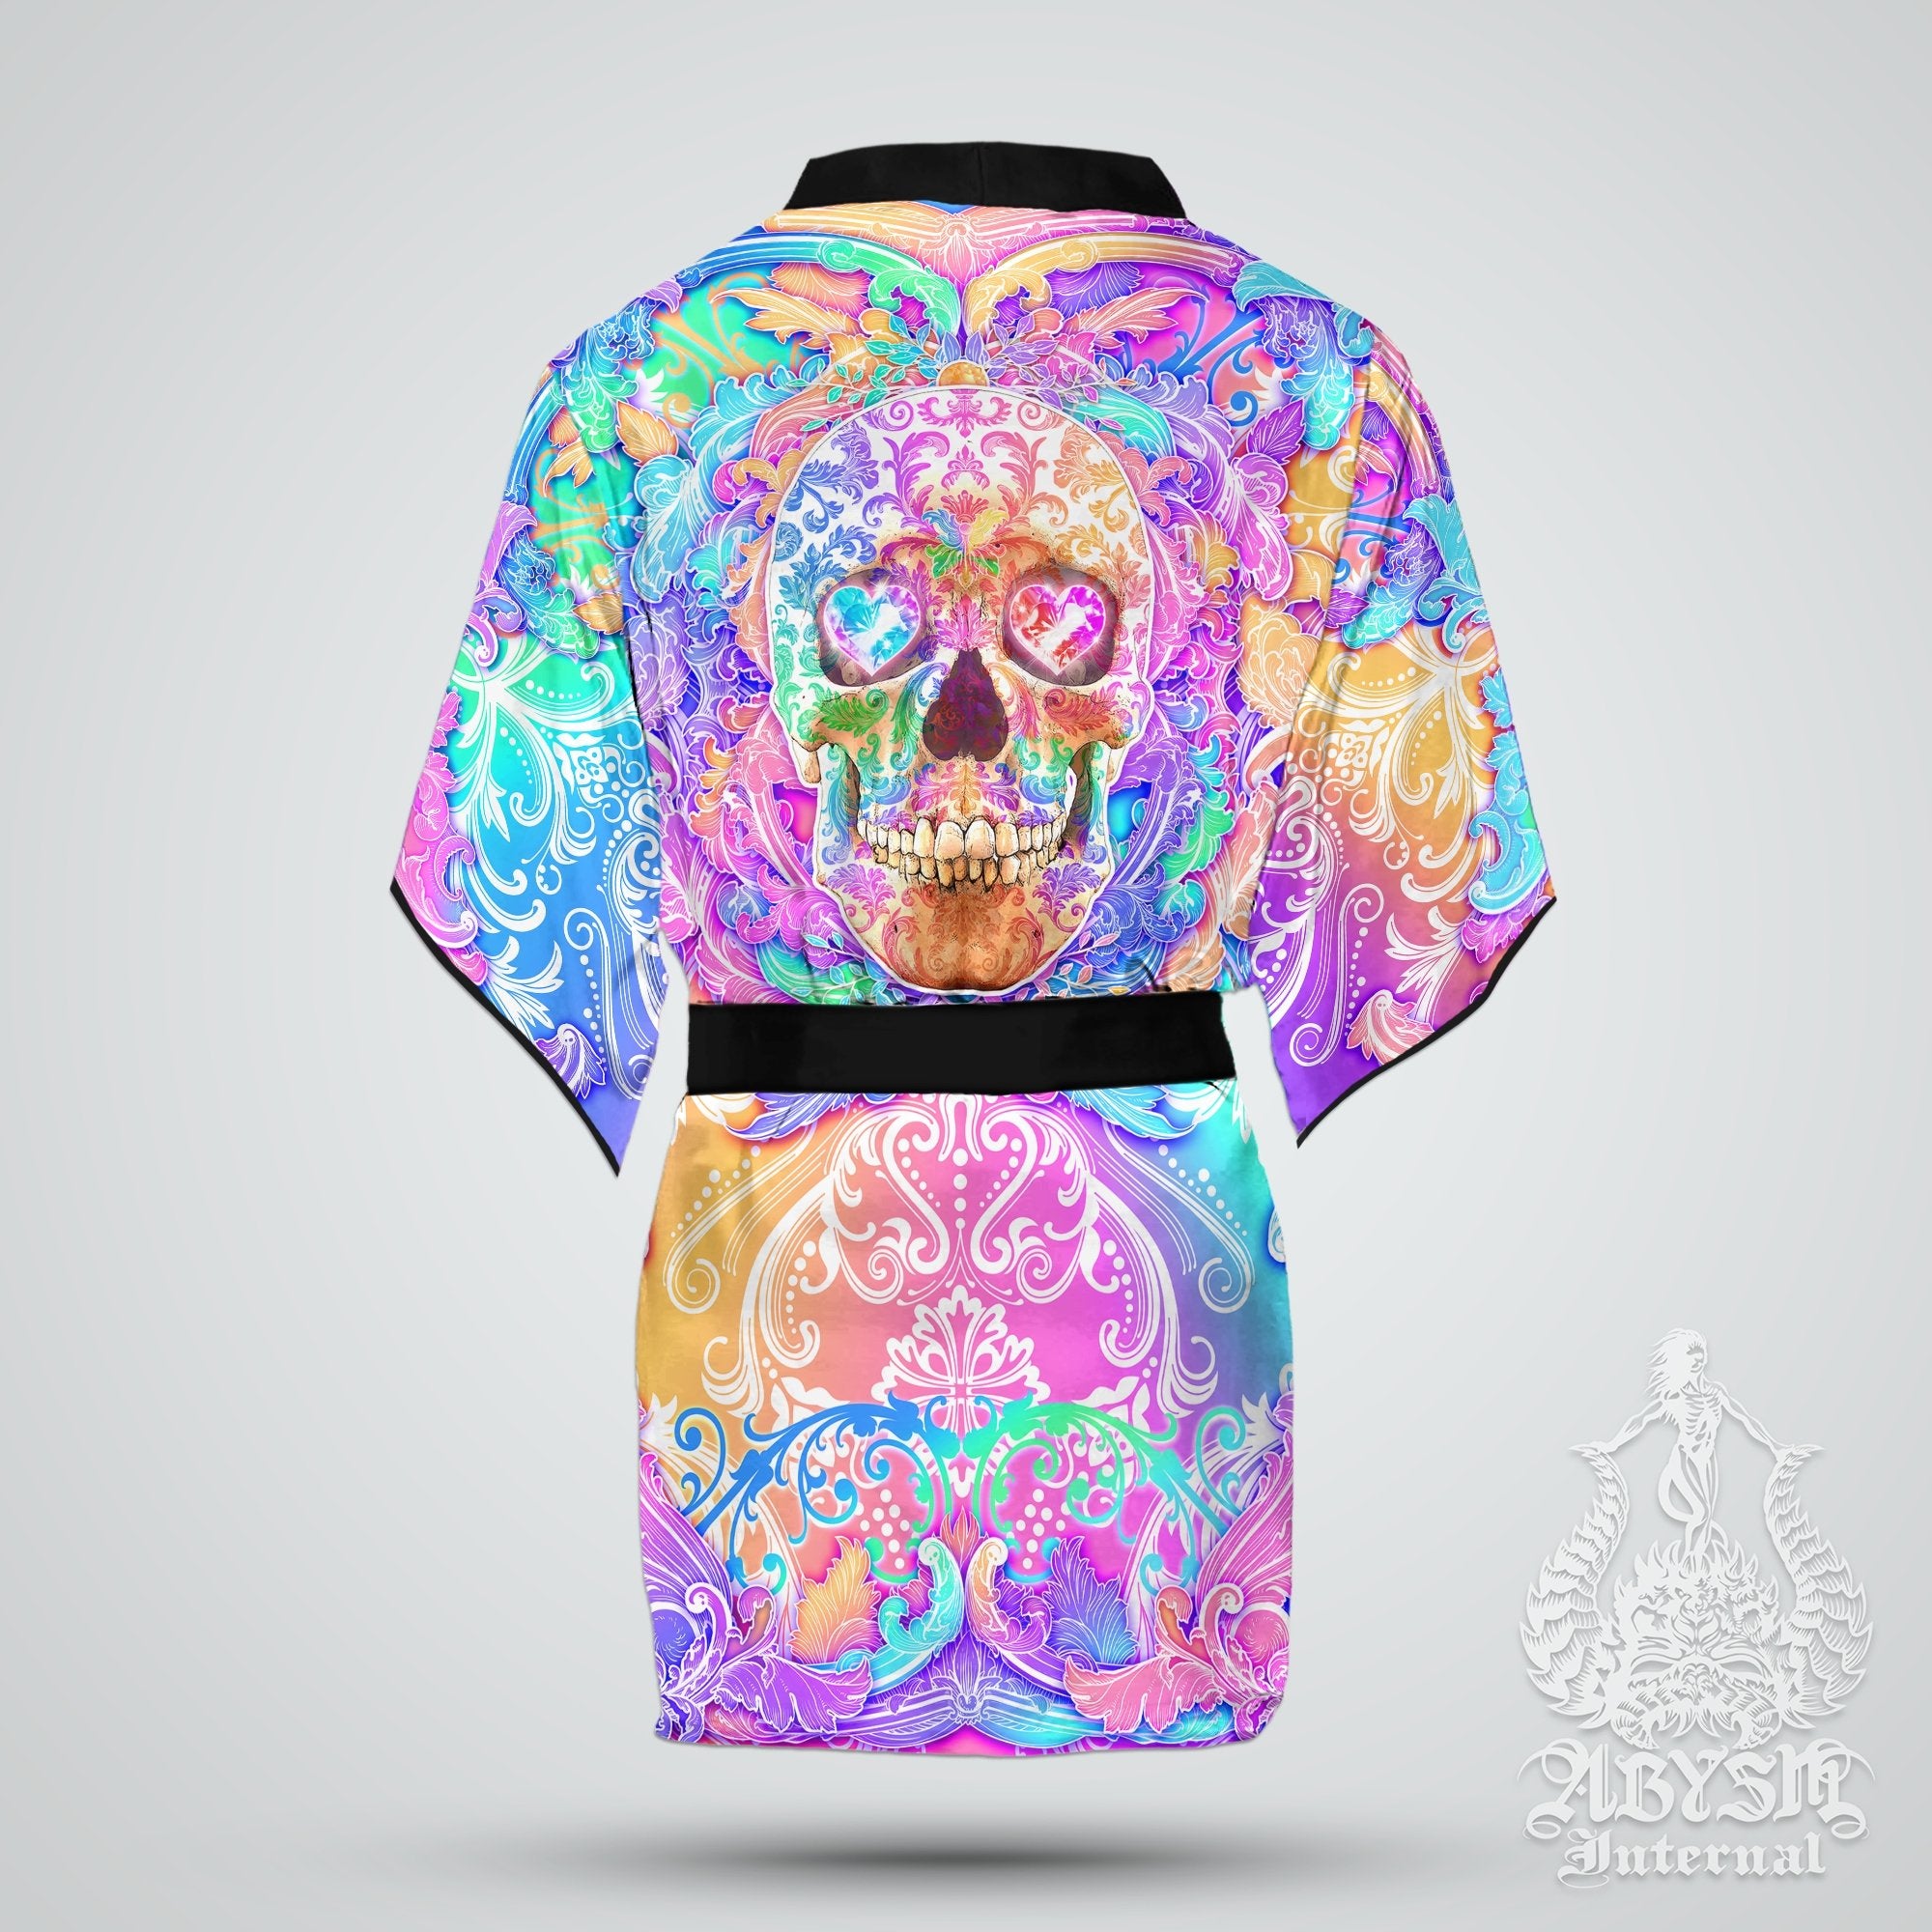 Skull Cover Up, Beach Rave Outfit, Party Kimono, Boho Summer Festival Robe, Aesthetic Indie and Alternative Clothing, Unisex - Holographic Pastel - Abysm Internal